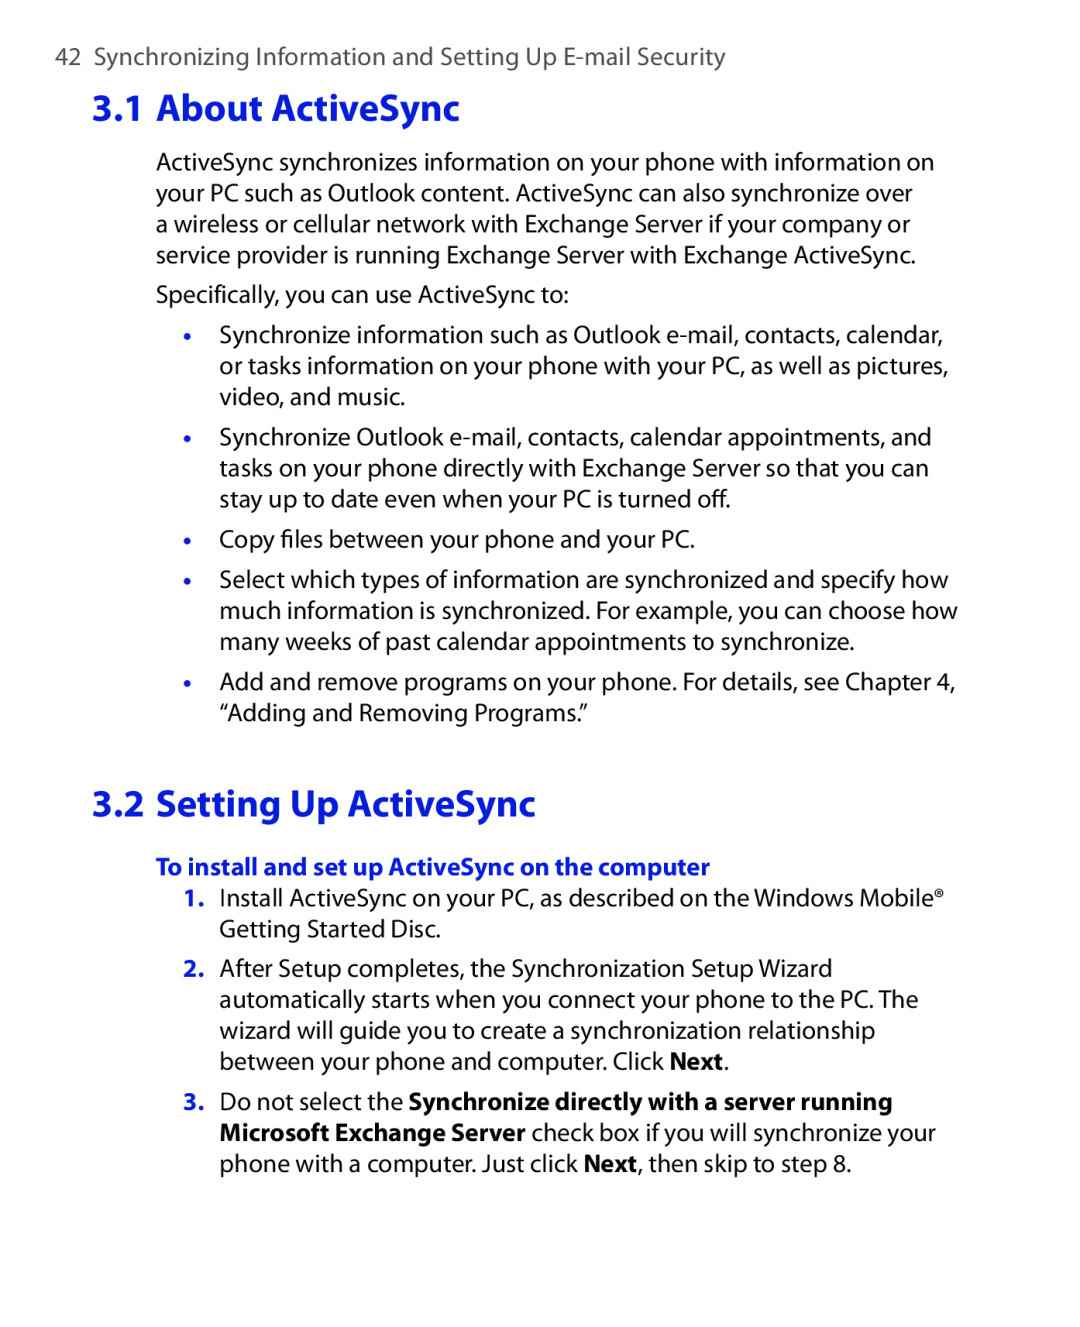 HTC HTC S621 user manual About ActiveSync, Setting Up ActiveSync, Synchronizing Information and Setting Up E-mail Security 